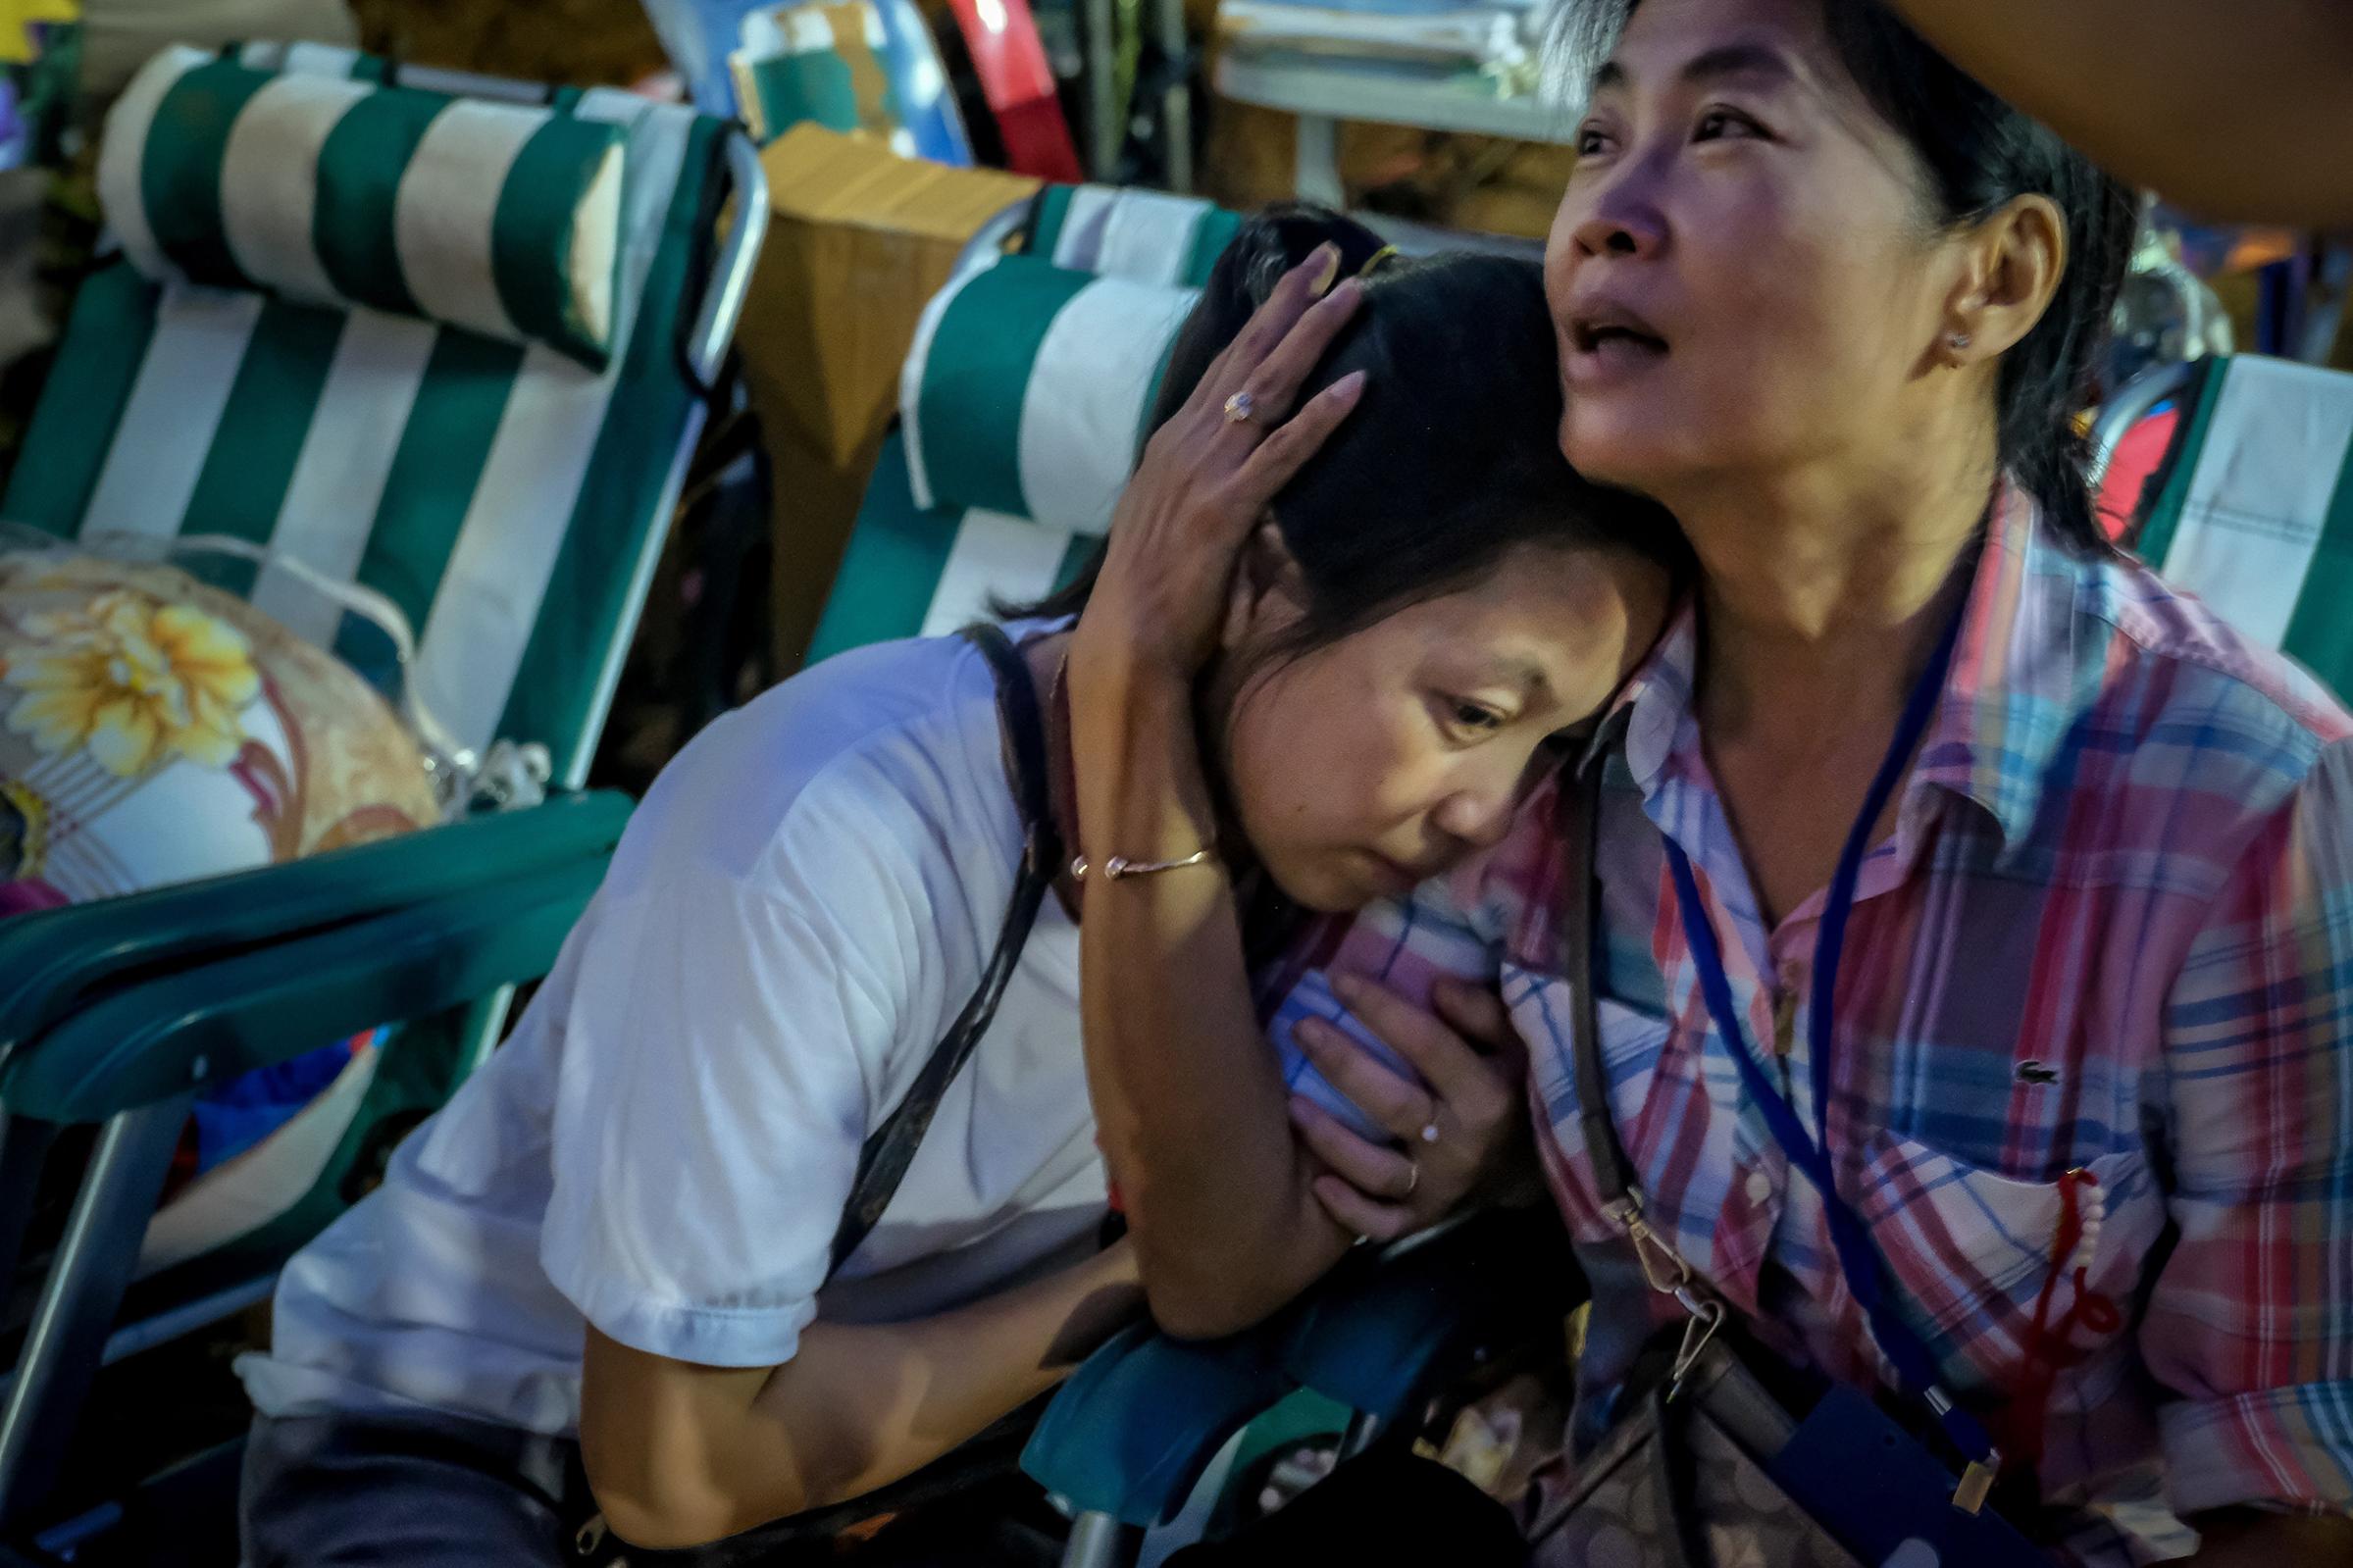 Relatives of the missing boys react after the 12 boys and their soccer coach have been found alive in the cave where they've been missing for over a week after monsoon rains blocked the main entrance on July 2, 2018 in Chiang Rai, Thailand.